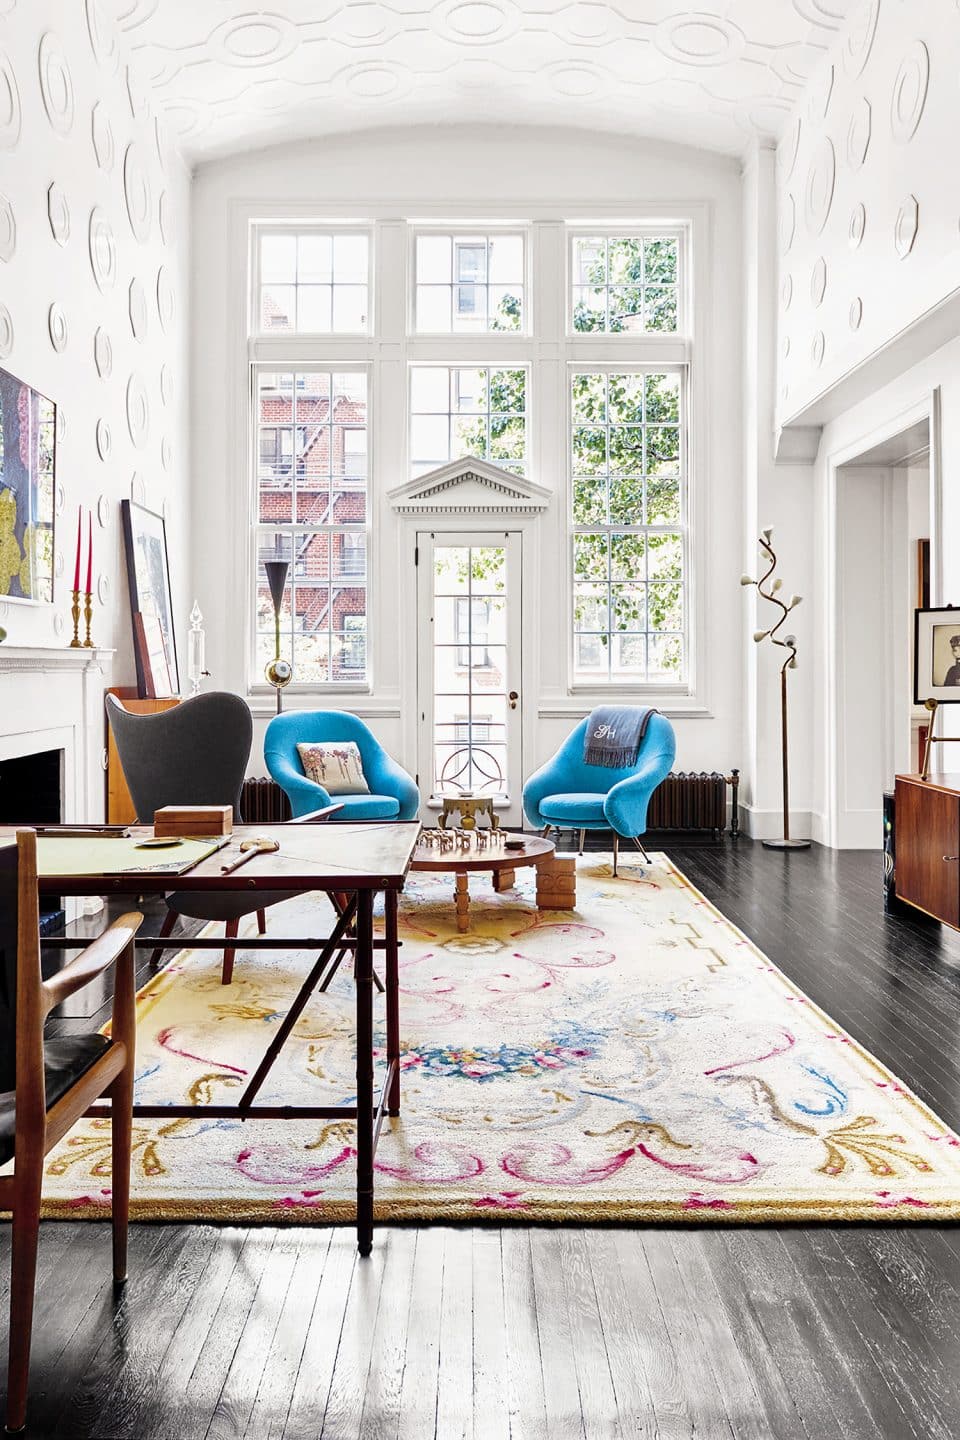 See How New York City Designers Experiment on Their Own Homes